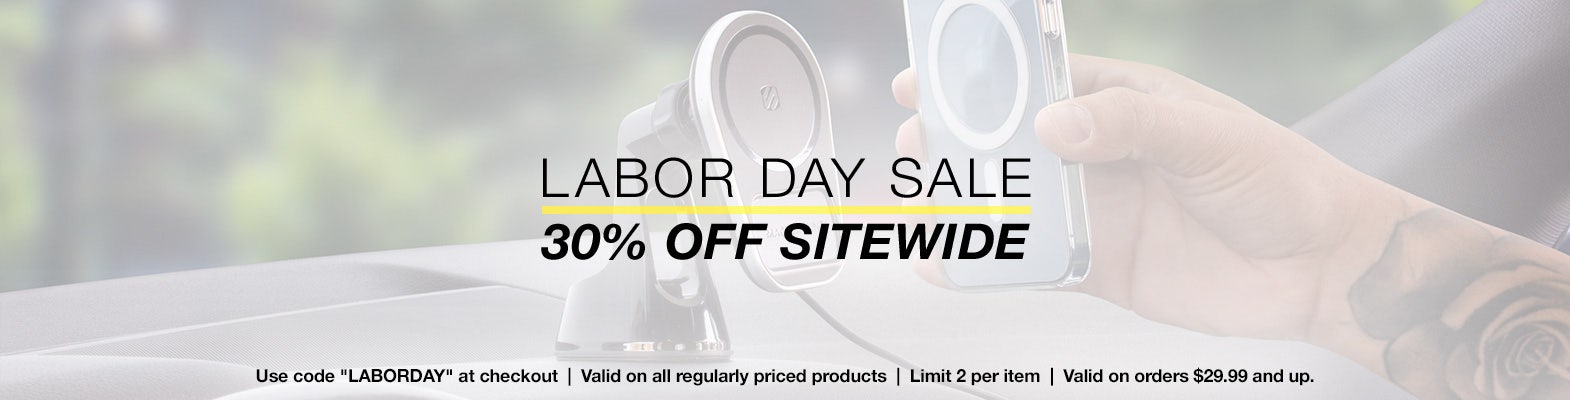 Labor Day Sale. 30% Off sitewide. Use code "LABORDAY" at Checkout. Valid on any regular-priced items. Order Minimum of $29.99 to Qualify. Limit 2 Per Item. Offer Valid Through 9/4/2023